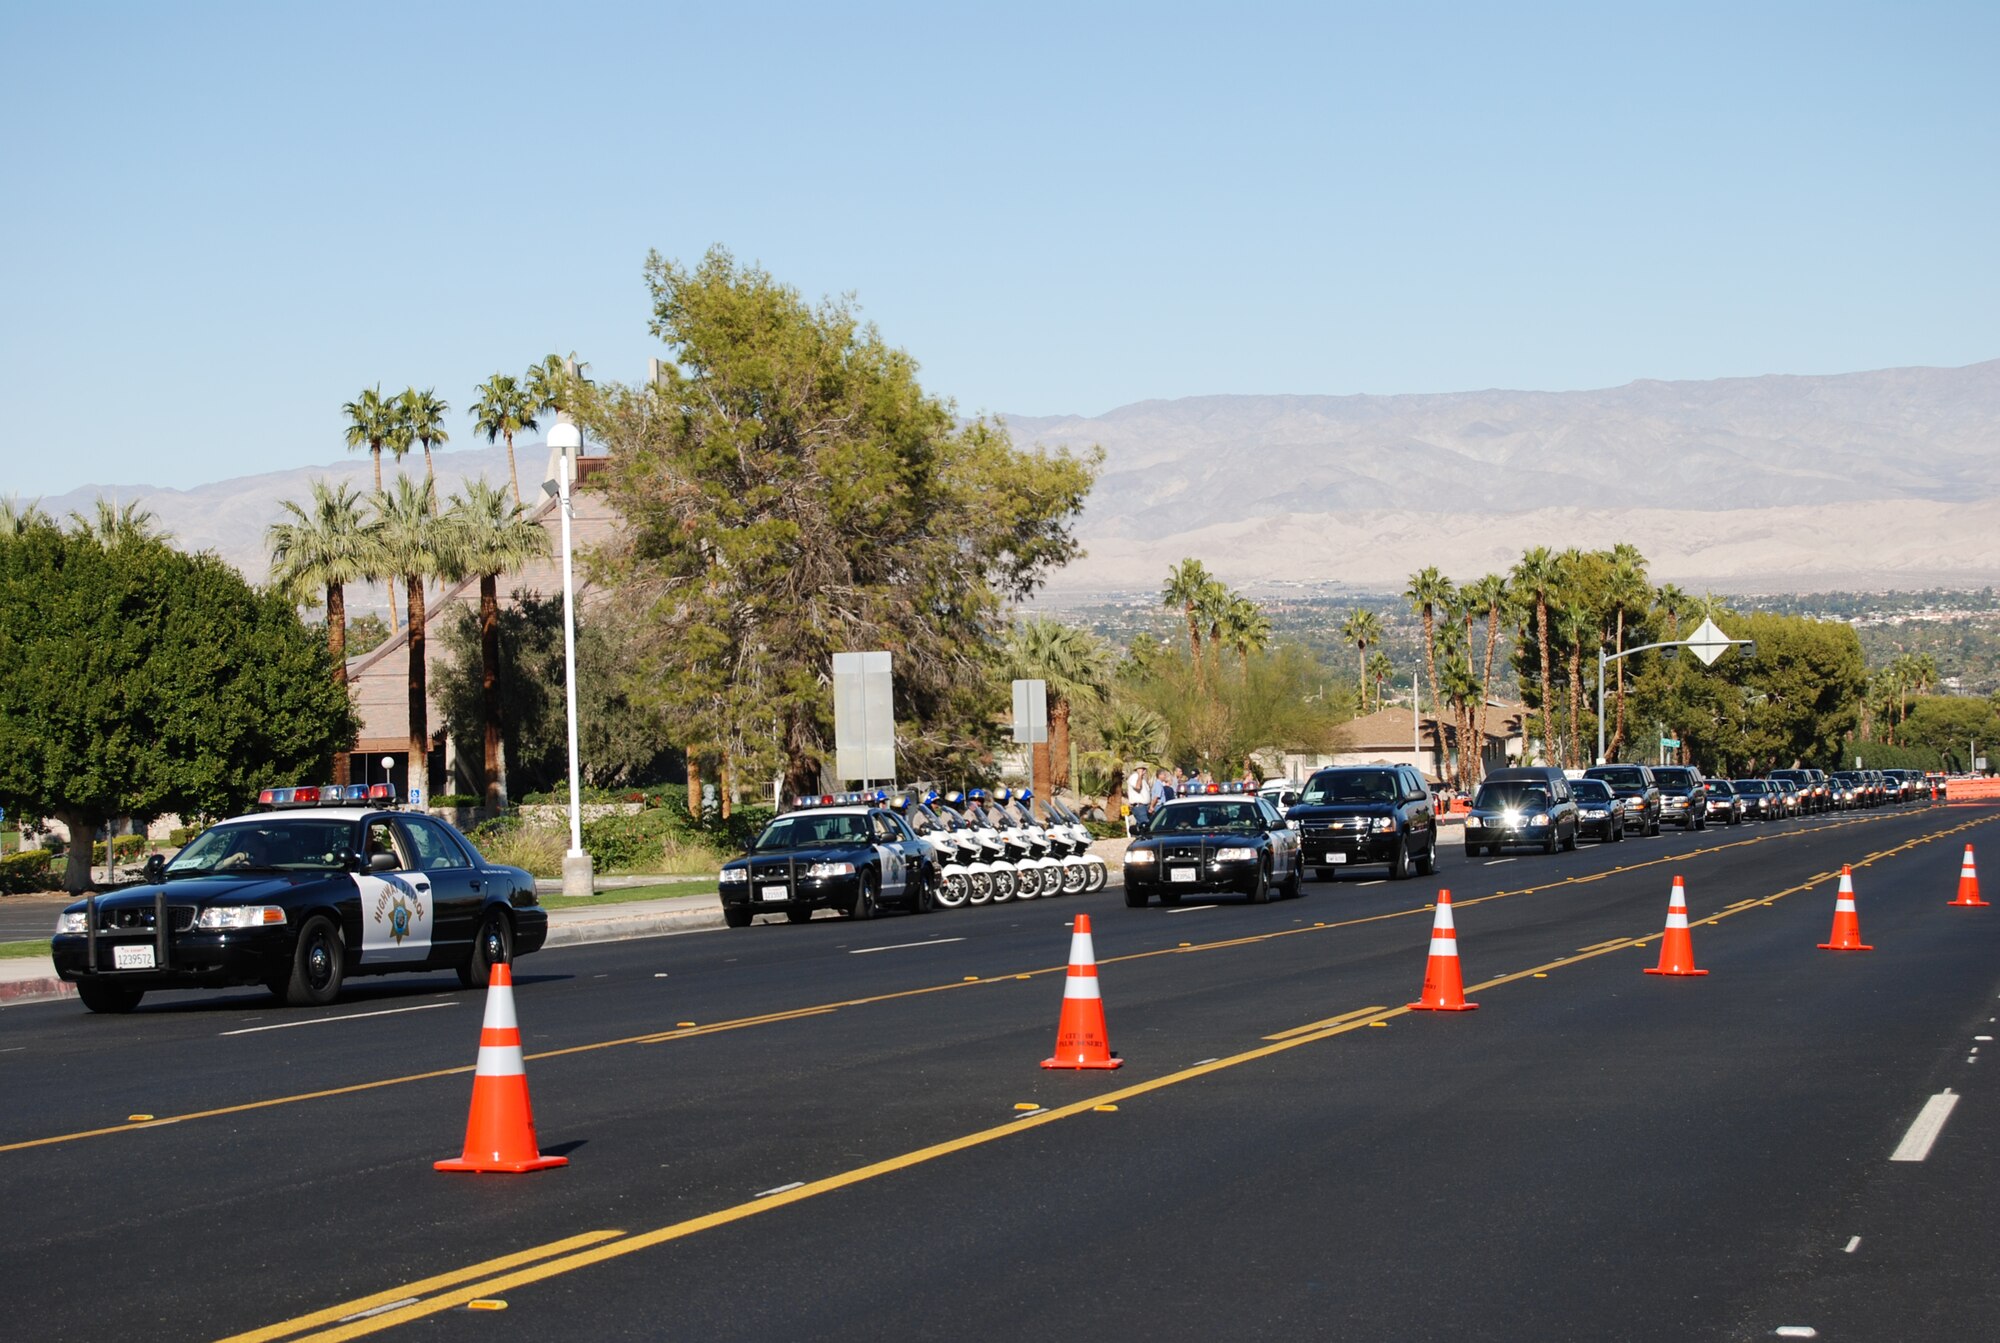 The former President Gerald R. Ford motorcade advances along Highway 74 Dec. 29 en route to St. Margaret's Episcopal Church in Palm Desert, California, for the private family prayer service. More than 500 military members are in Palm Desert supporting the California portion of the State Funeral for former President Gerald R. Ford. The military is providing ceremonial, logistics, and security support to honor and pay tribute to the former Commander-in-Chief and the Ford family. Ford died in Palm Desert, California, Dec. 26 at the age of 93. (U.S. Air Force Photo/1st Lt Carrie L. Kessler)